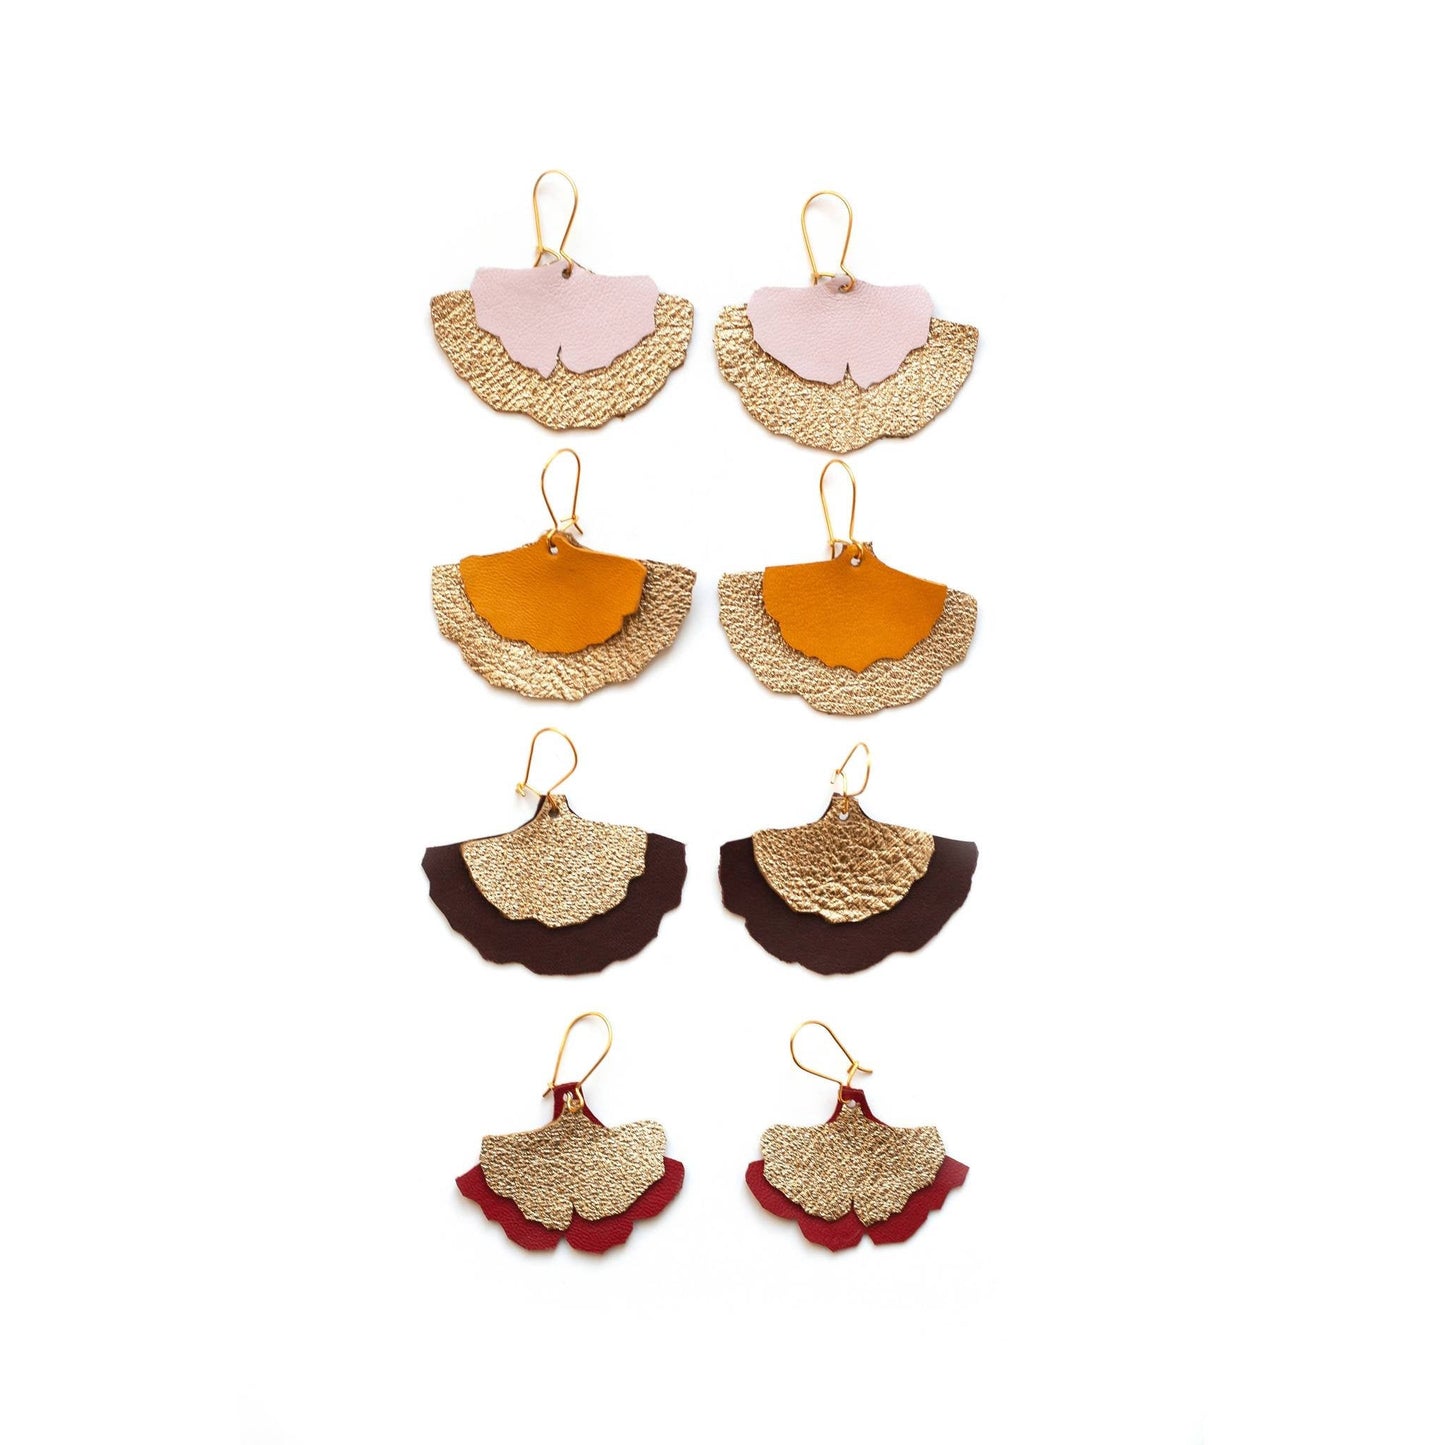 Ginkgo leaf earrings in gold and pink leather